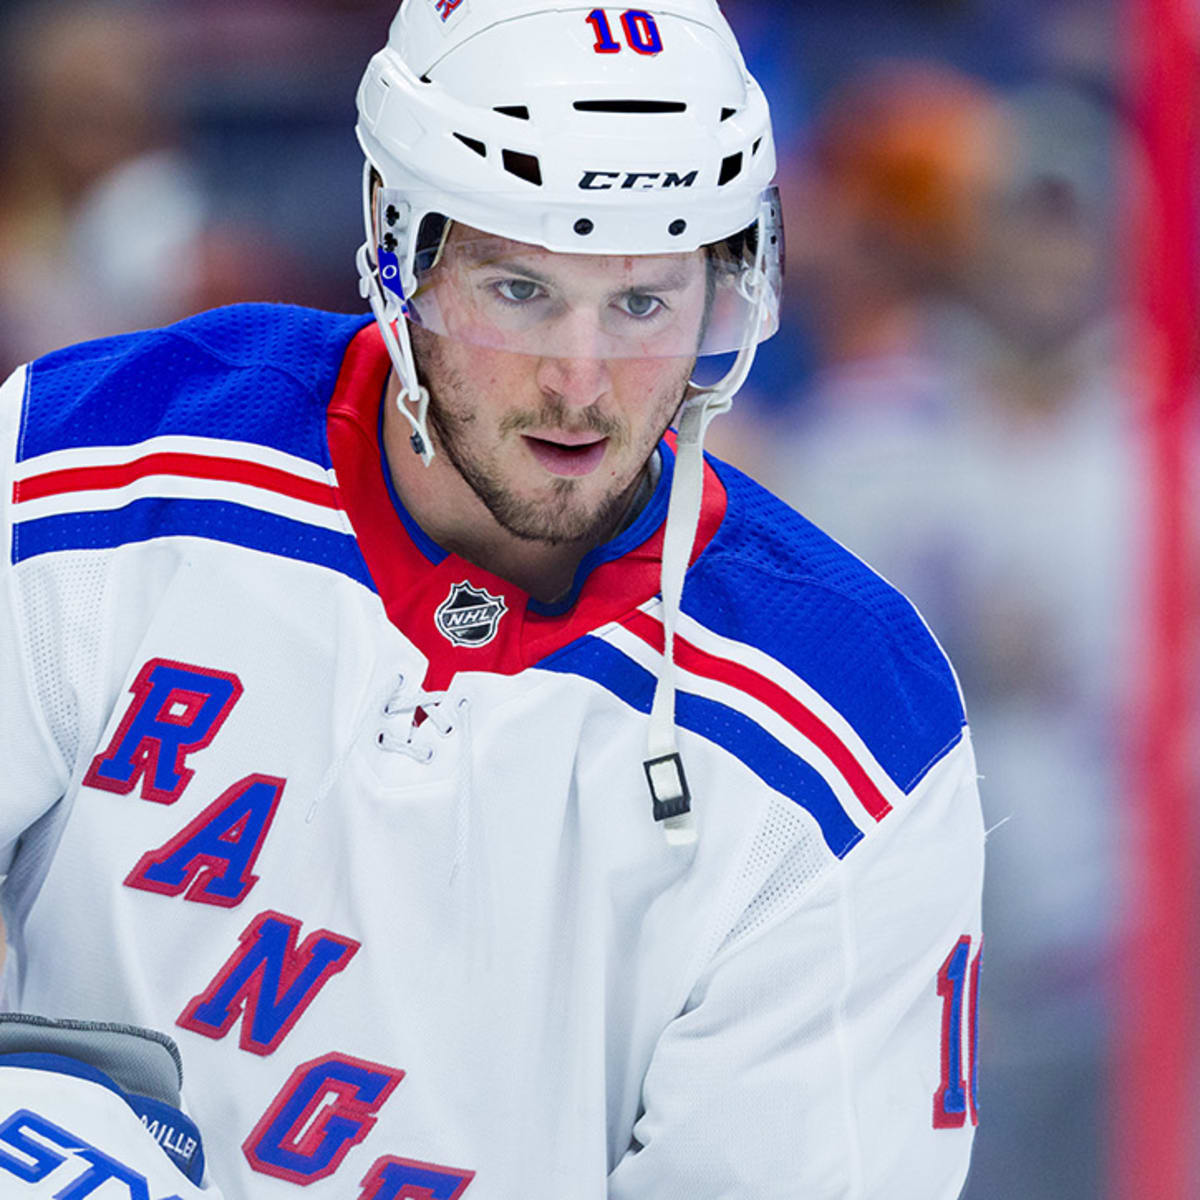 The Rangers are keeping J.T. Miller at wing - NBC Sports